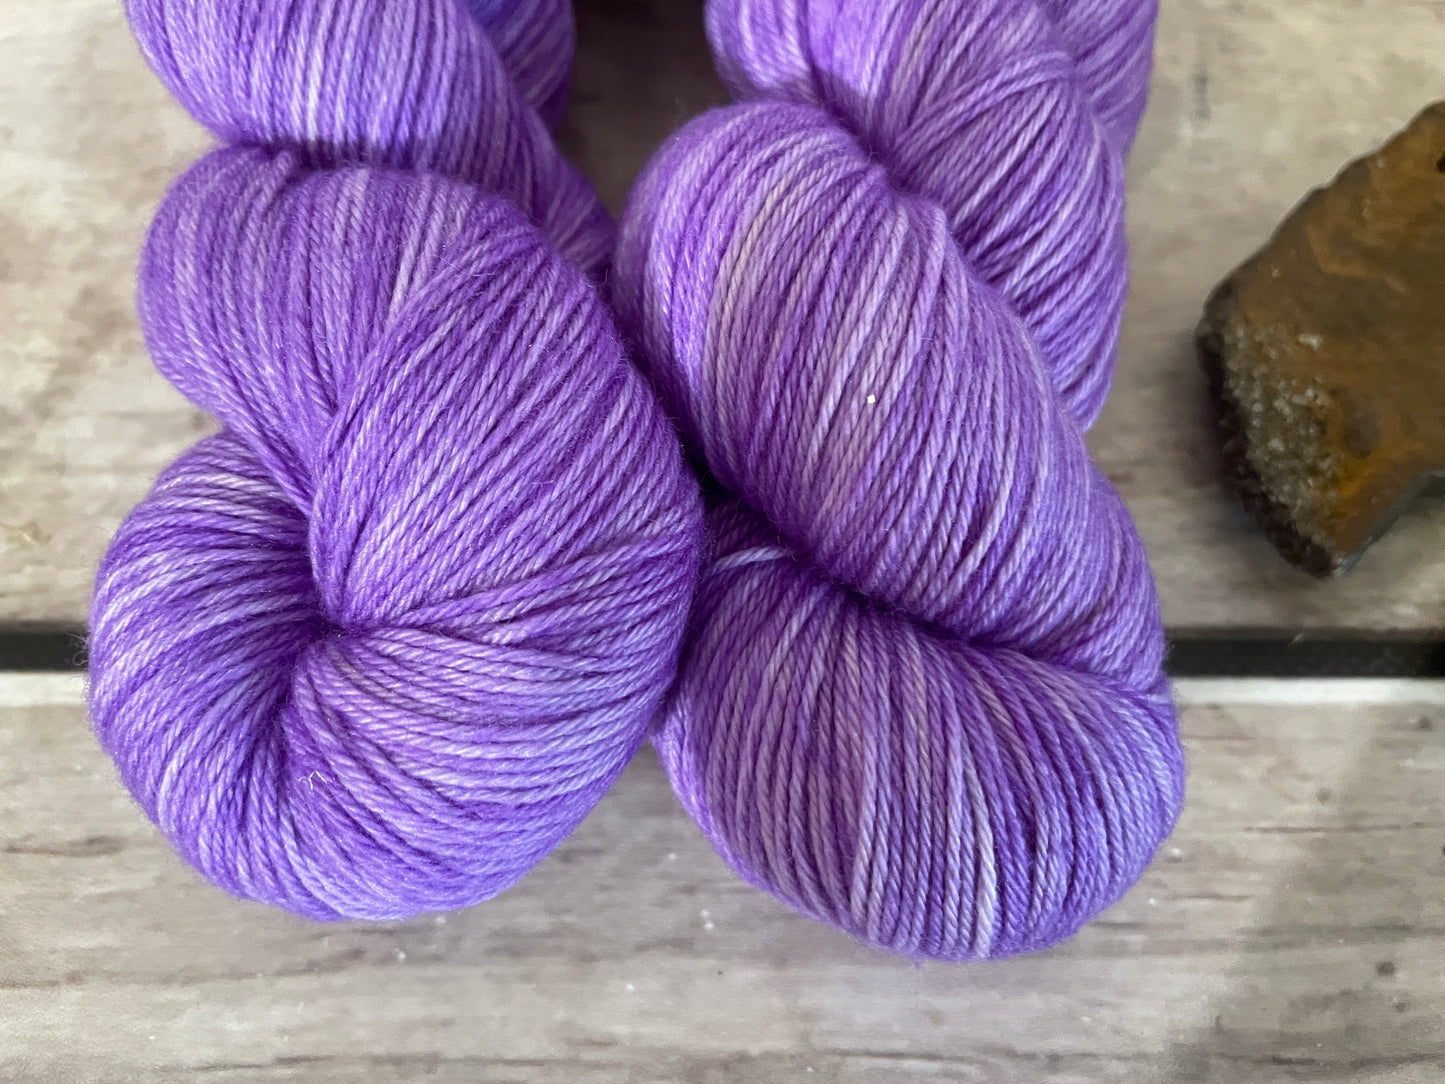 Two flourescent purple skeins of yarn are sitting on a wooden board